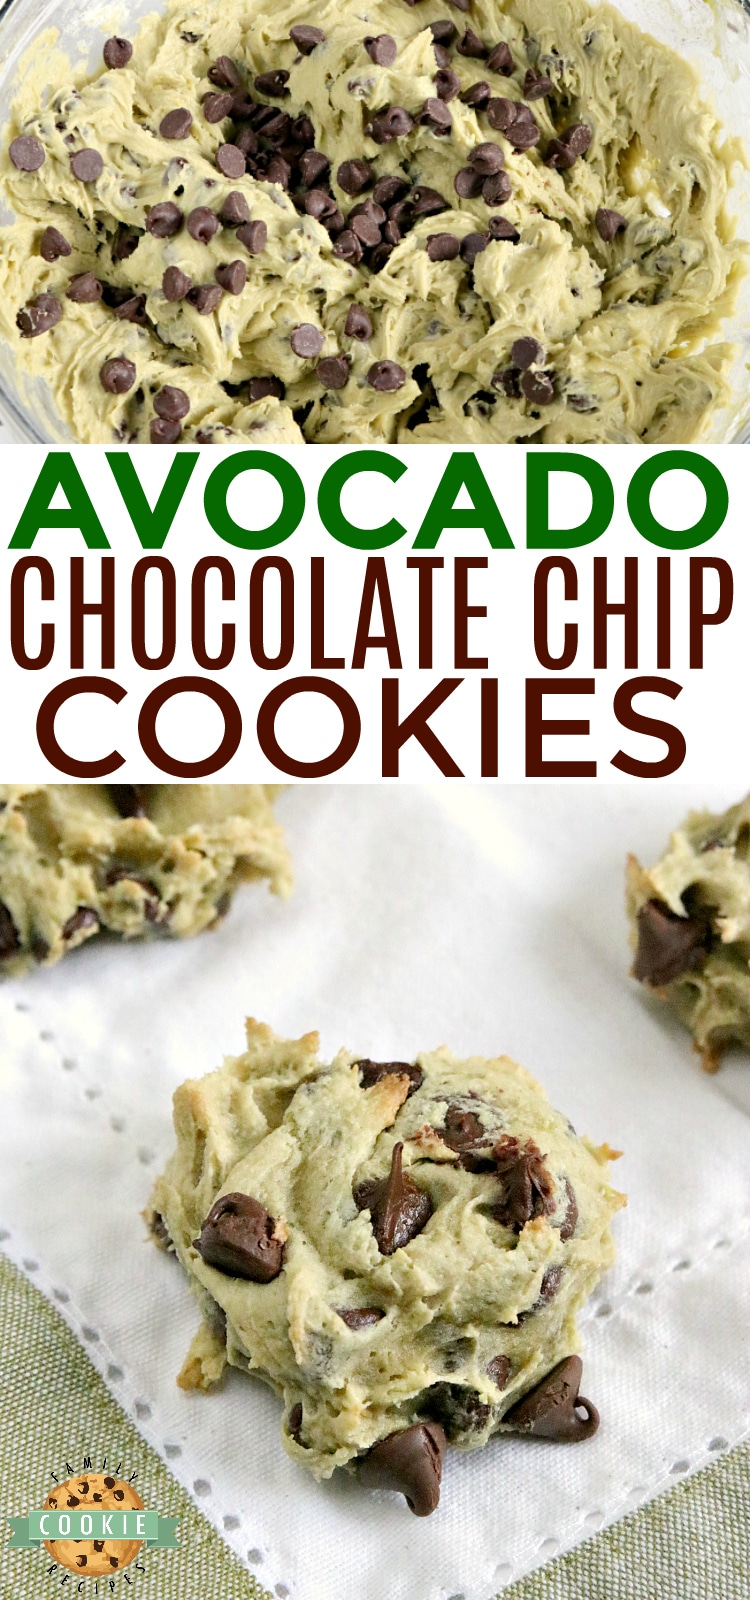 Avocado Chocolate Chip Cookies are soft, chewy and delicious! These chocolate chip cookies are made with avocado instead of butter - you've got to try it sometime!